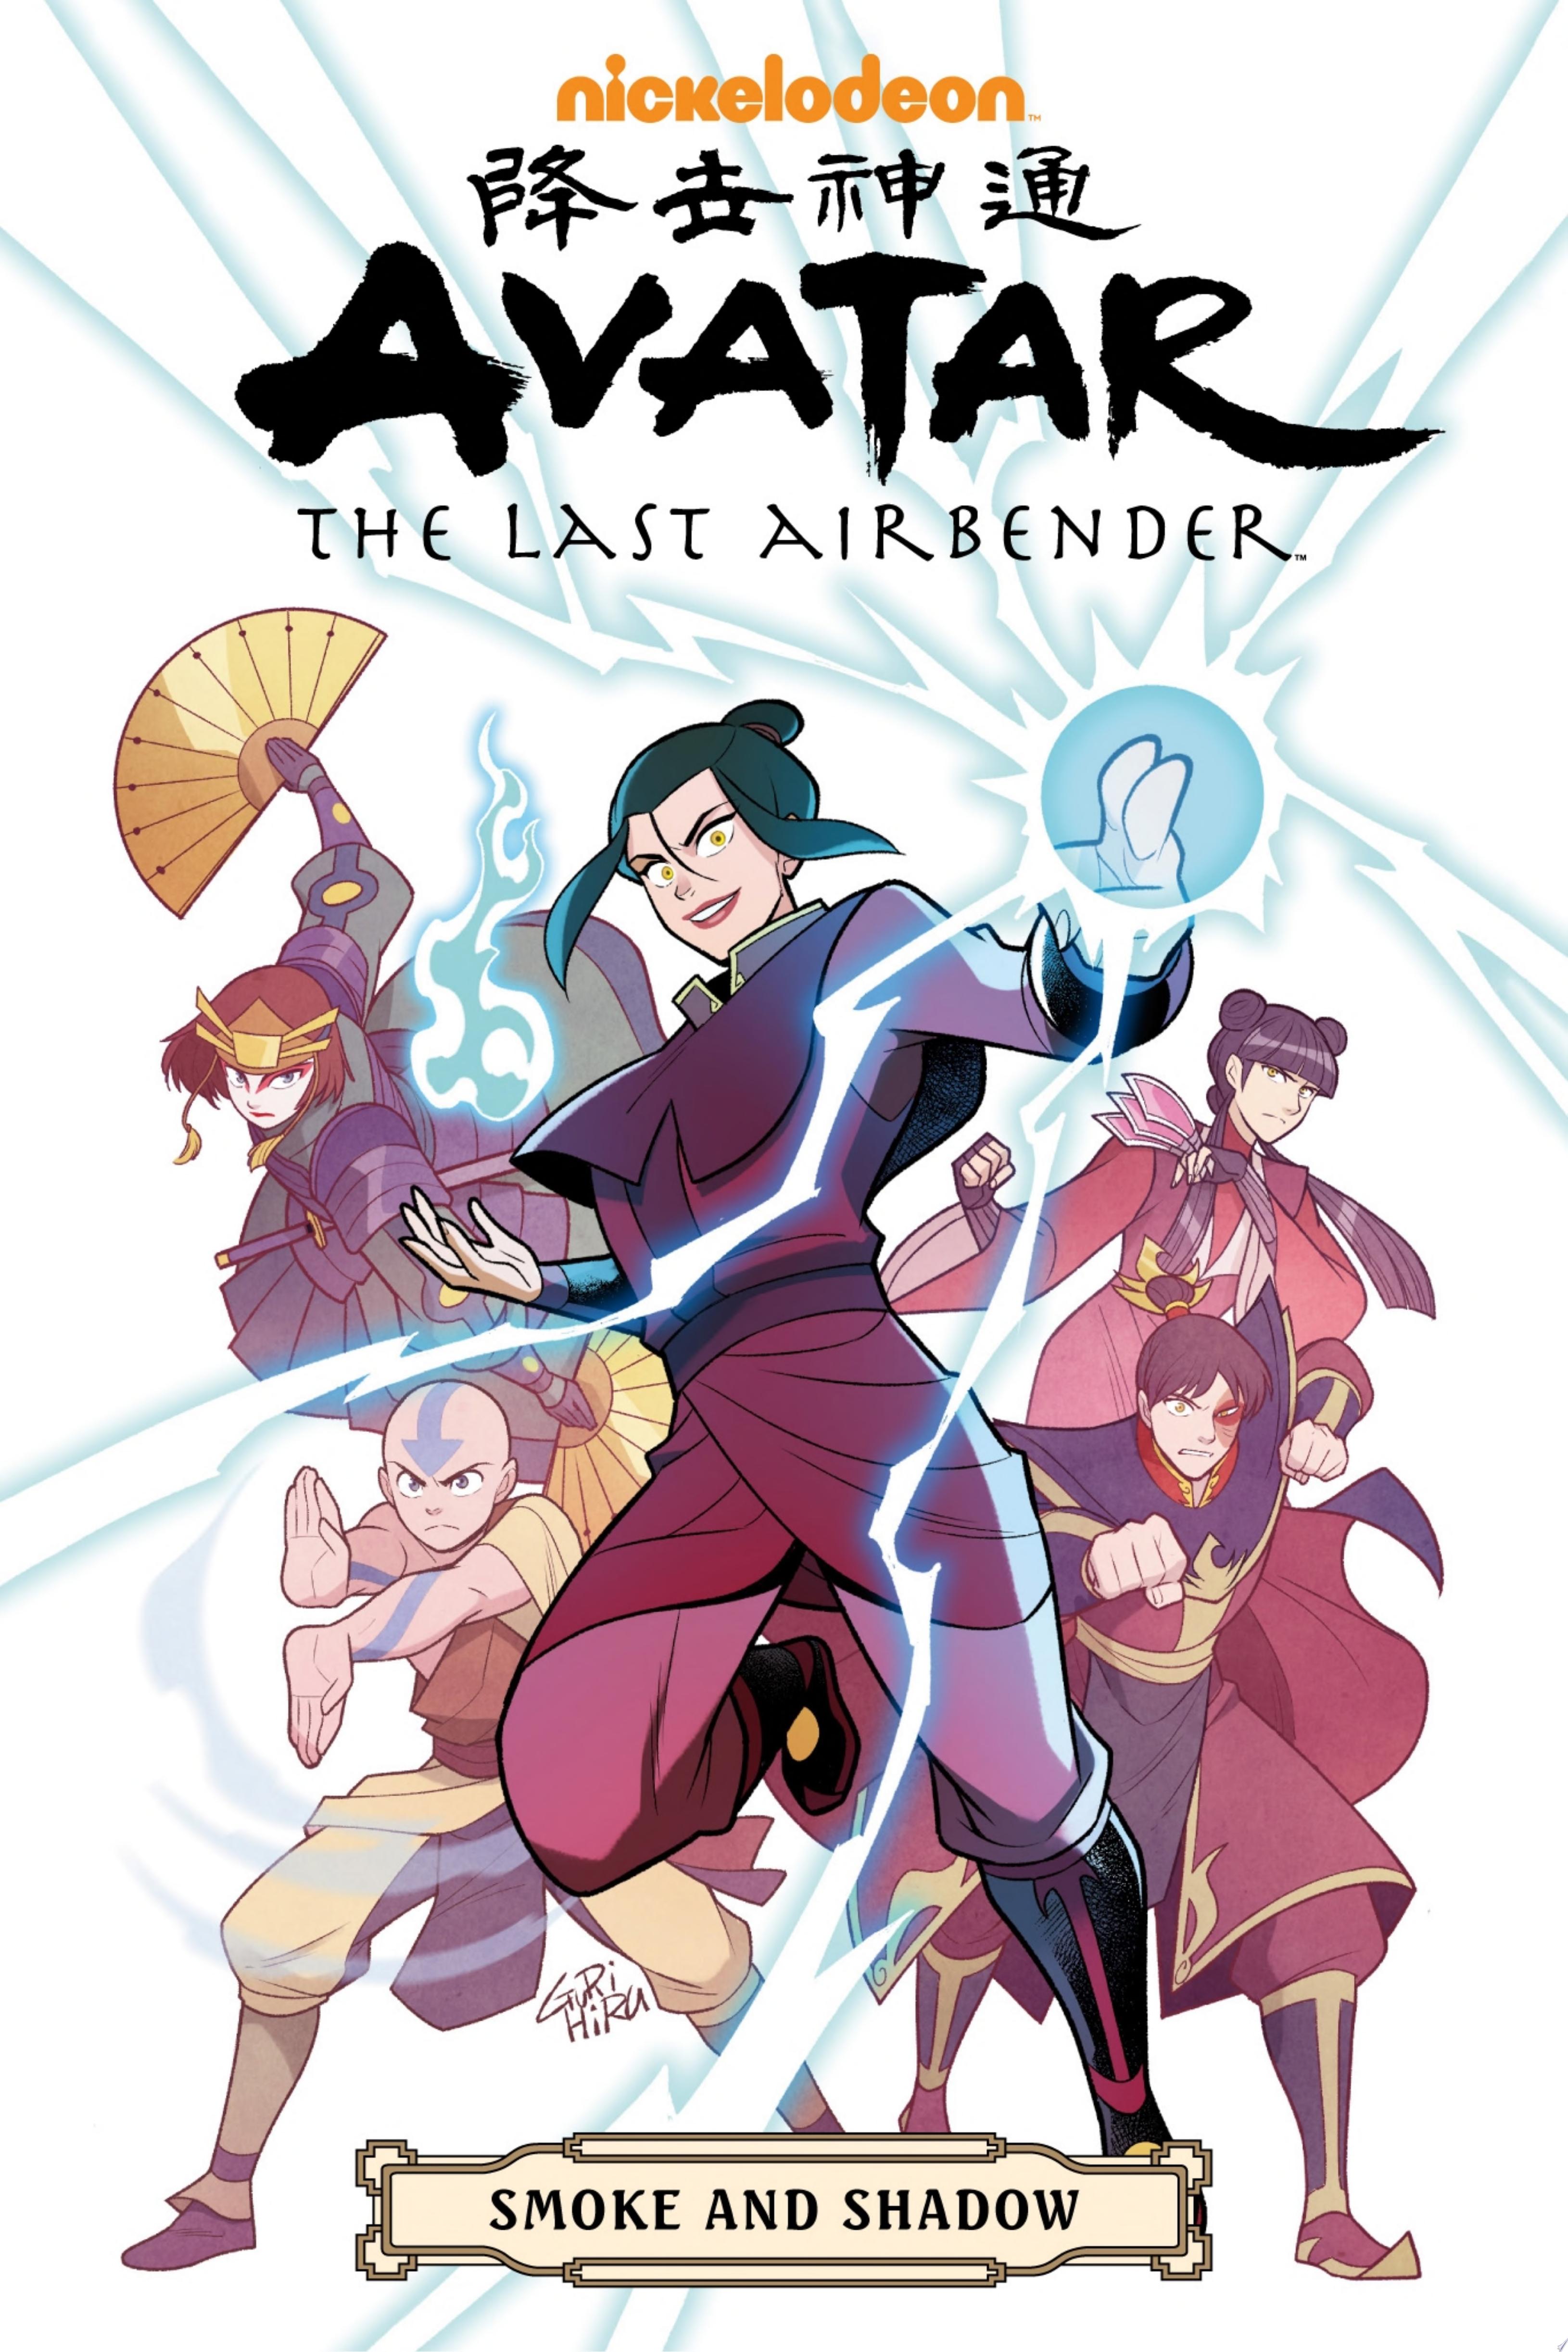 Image for "Avatar: The Last Airbender--Smoke and Shadow Omnibus"